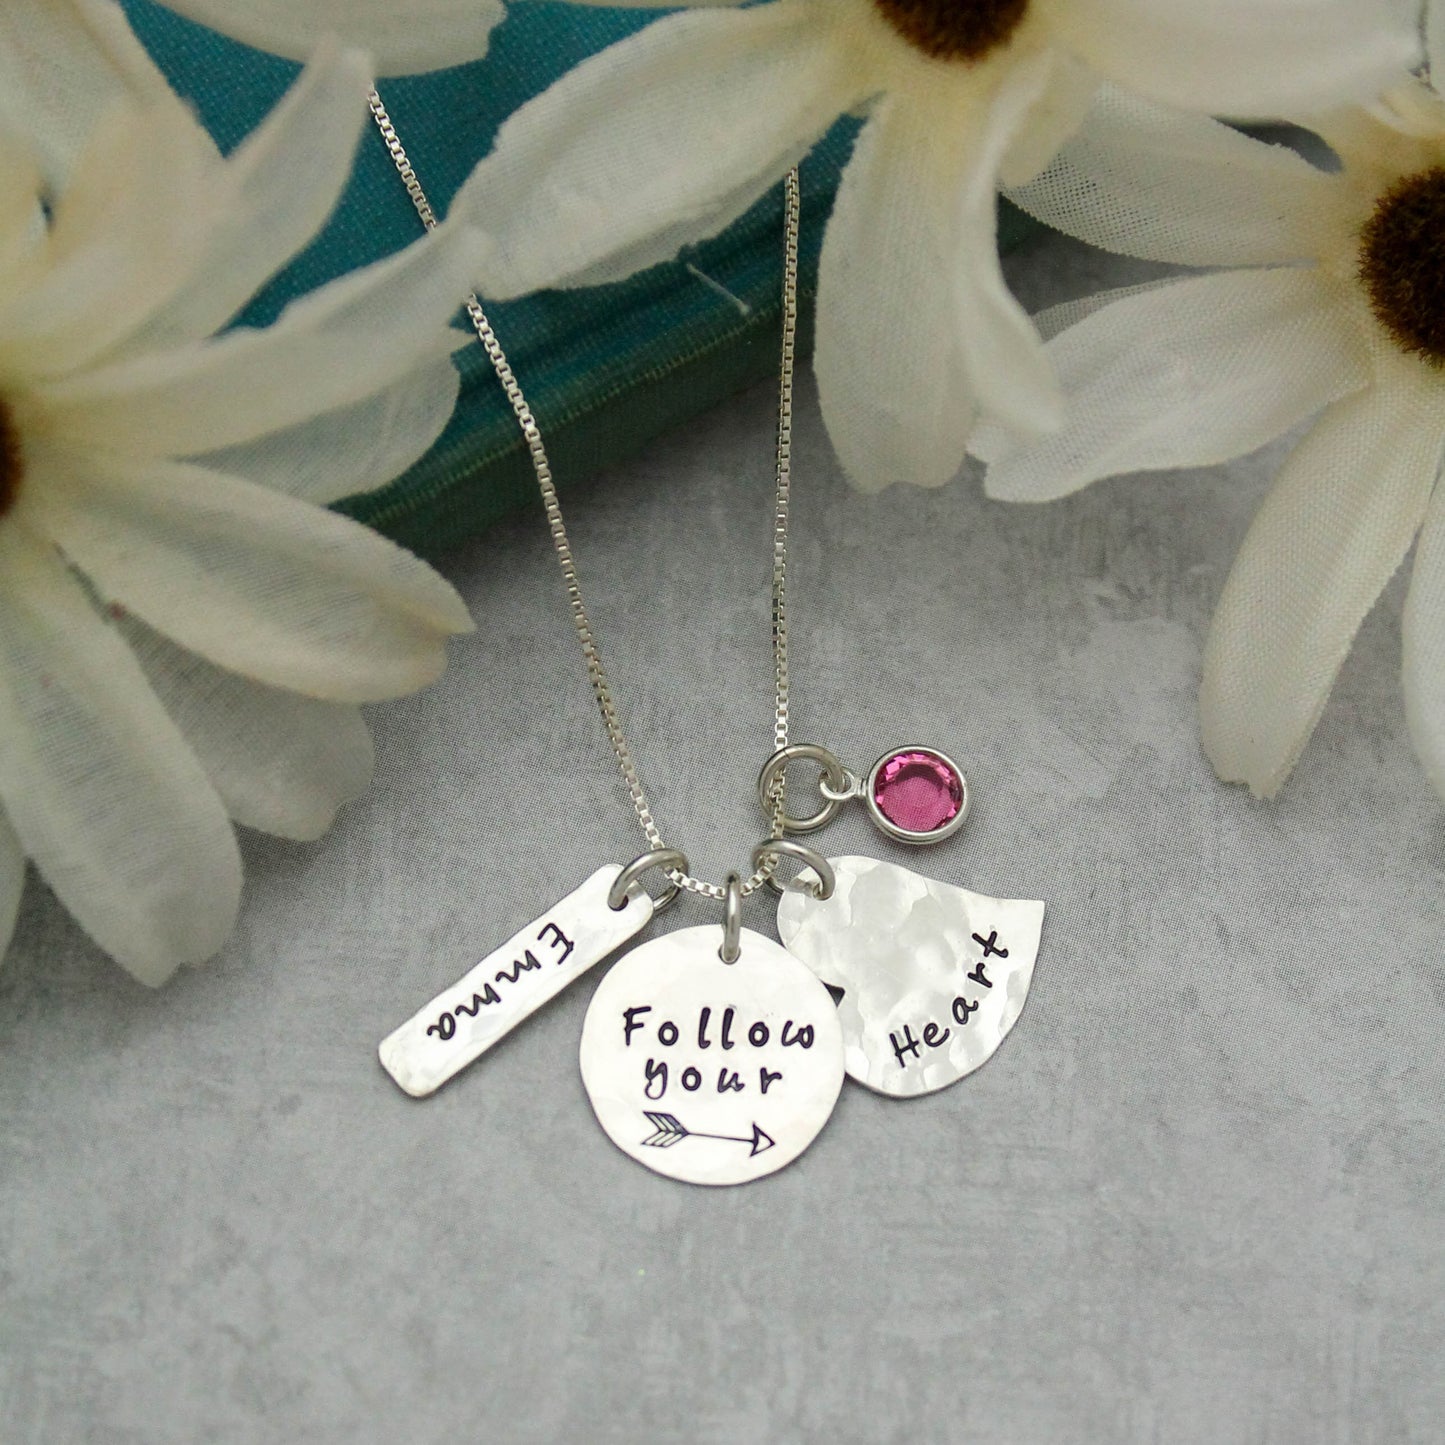 Follow Your Heart Necklace Graduation Gift, Personalized Grad Necklace, Follow Your Arrow Custom Graduation Jewelry, Graduation Gift for Her